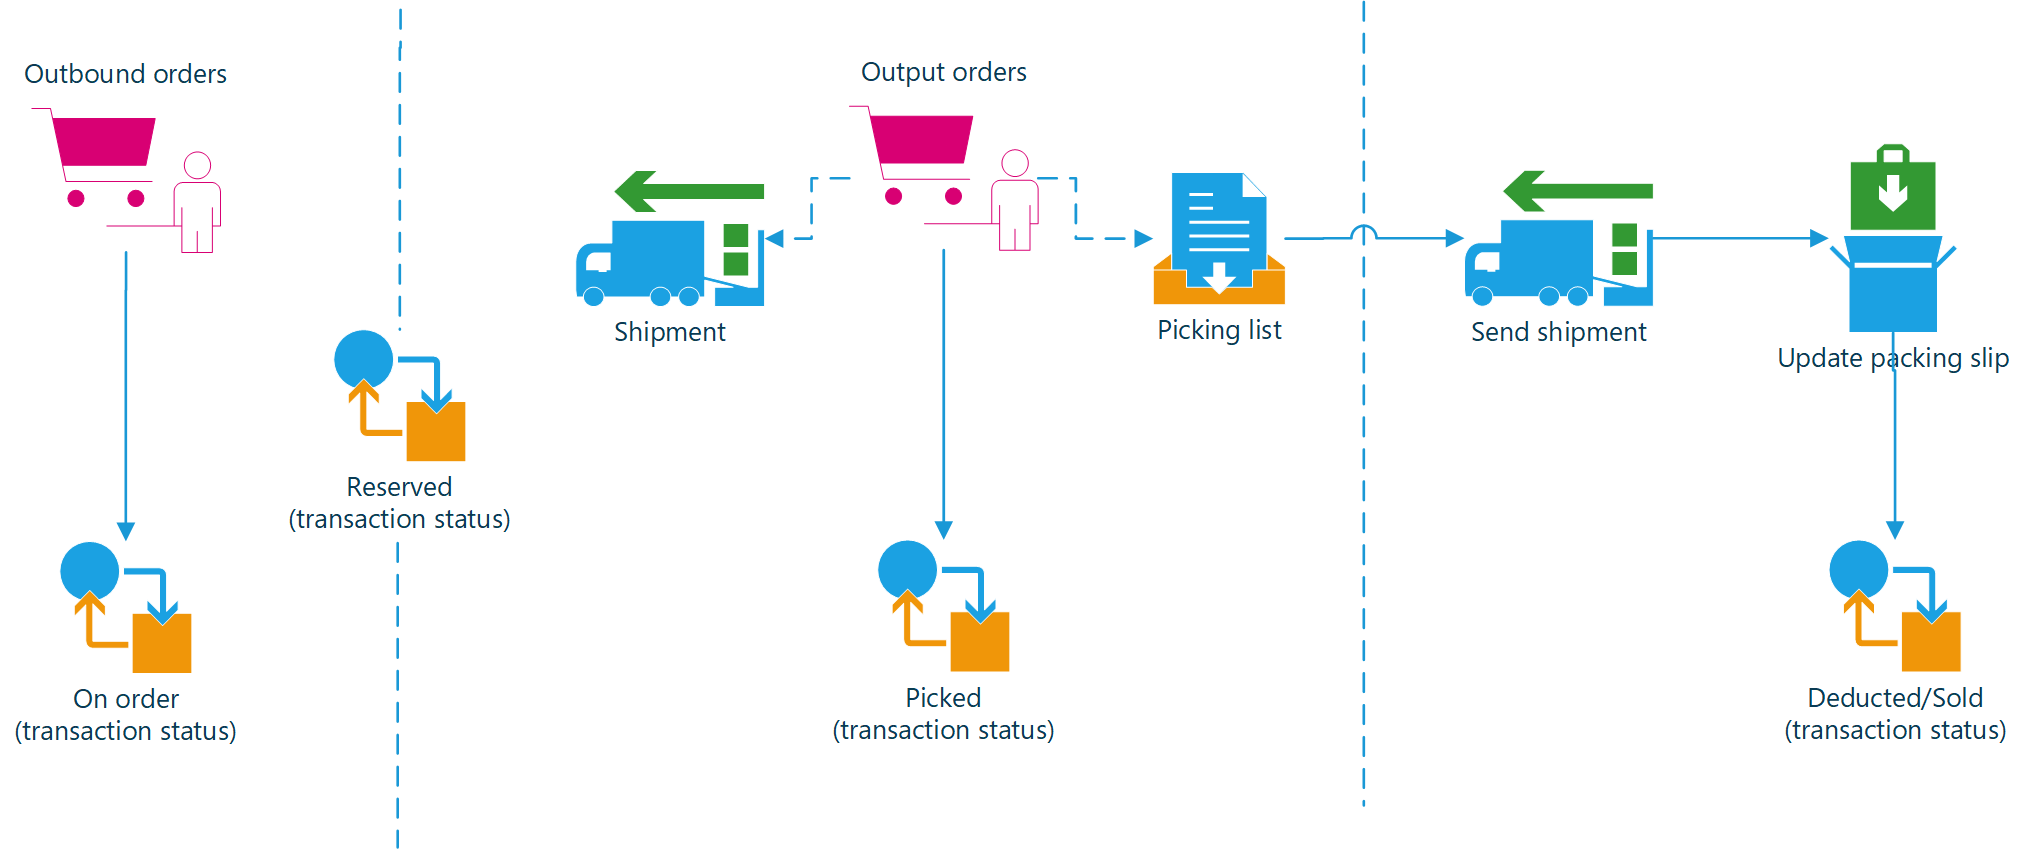 Overview of the outbound order process.